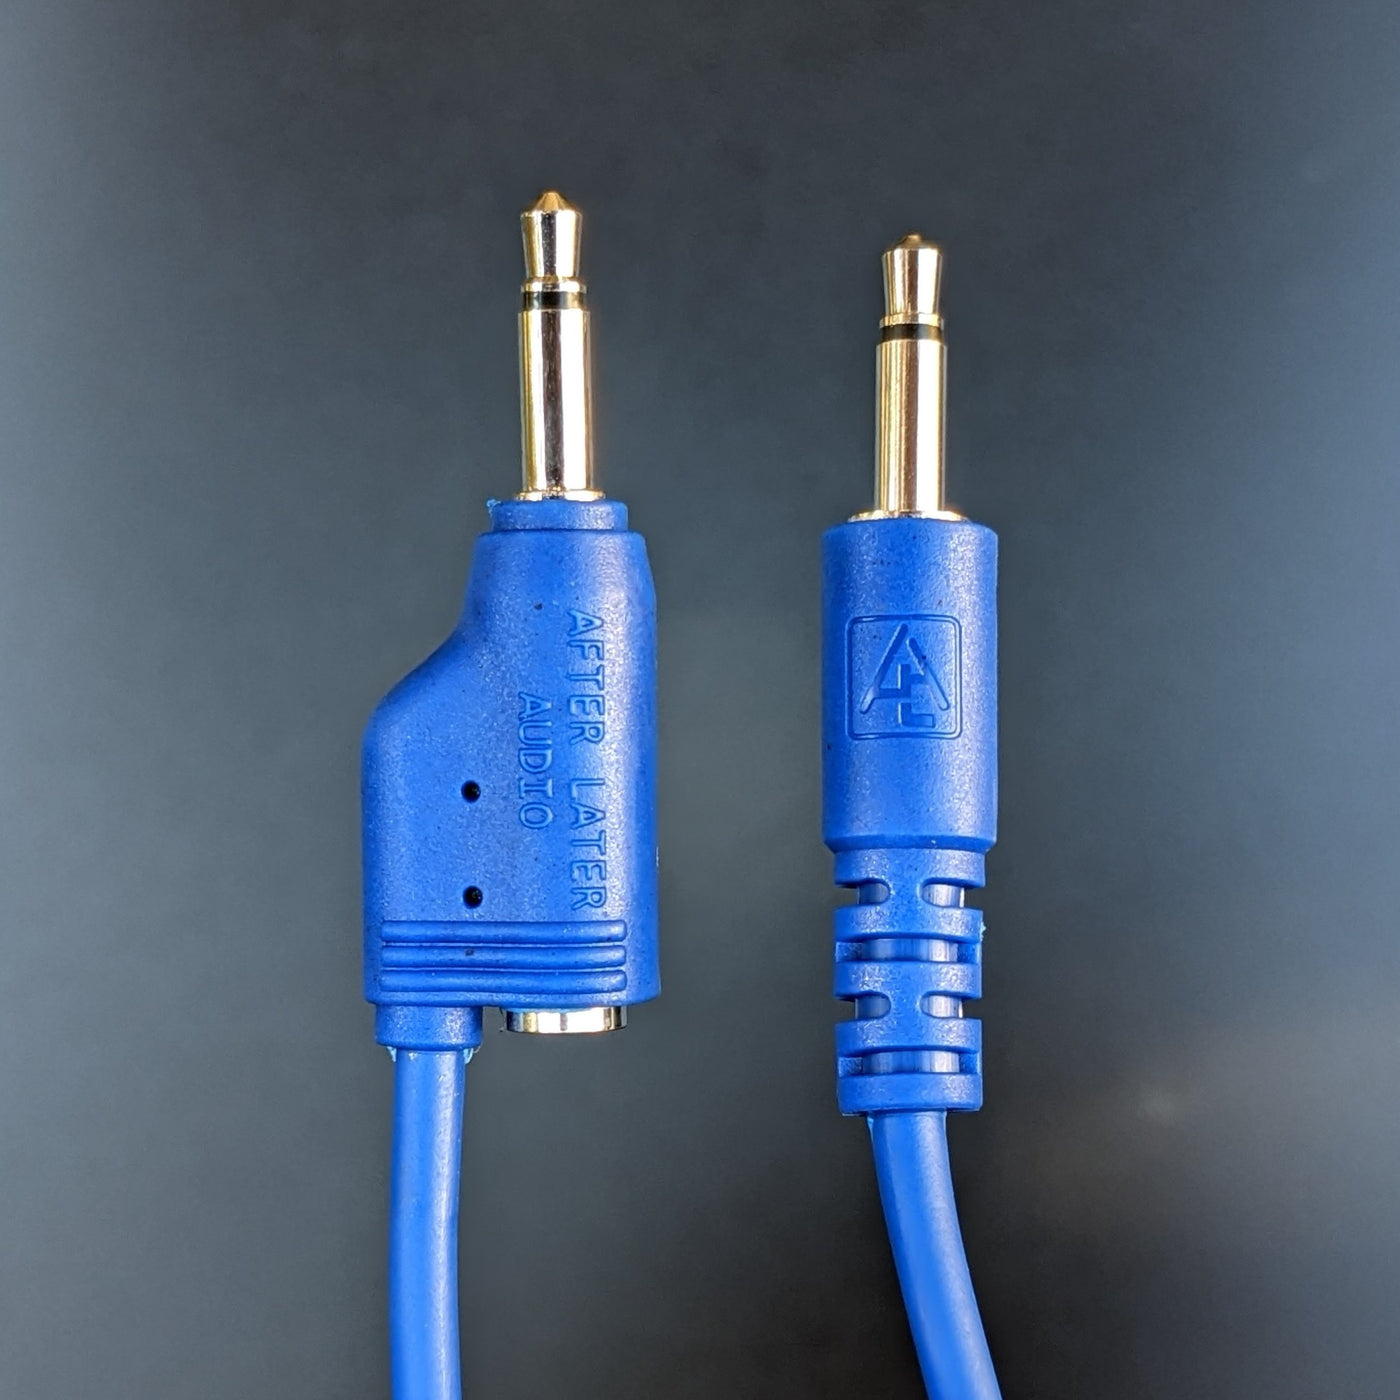 Single-End Stackable Patch Cable in Packs of 5 - Shorter connector